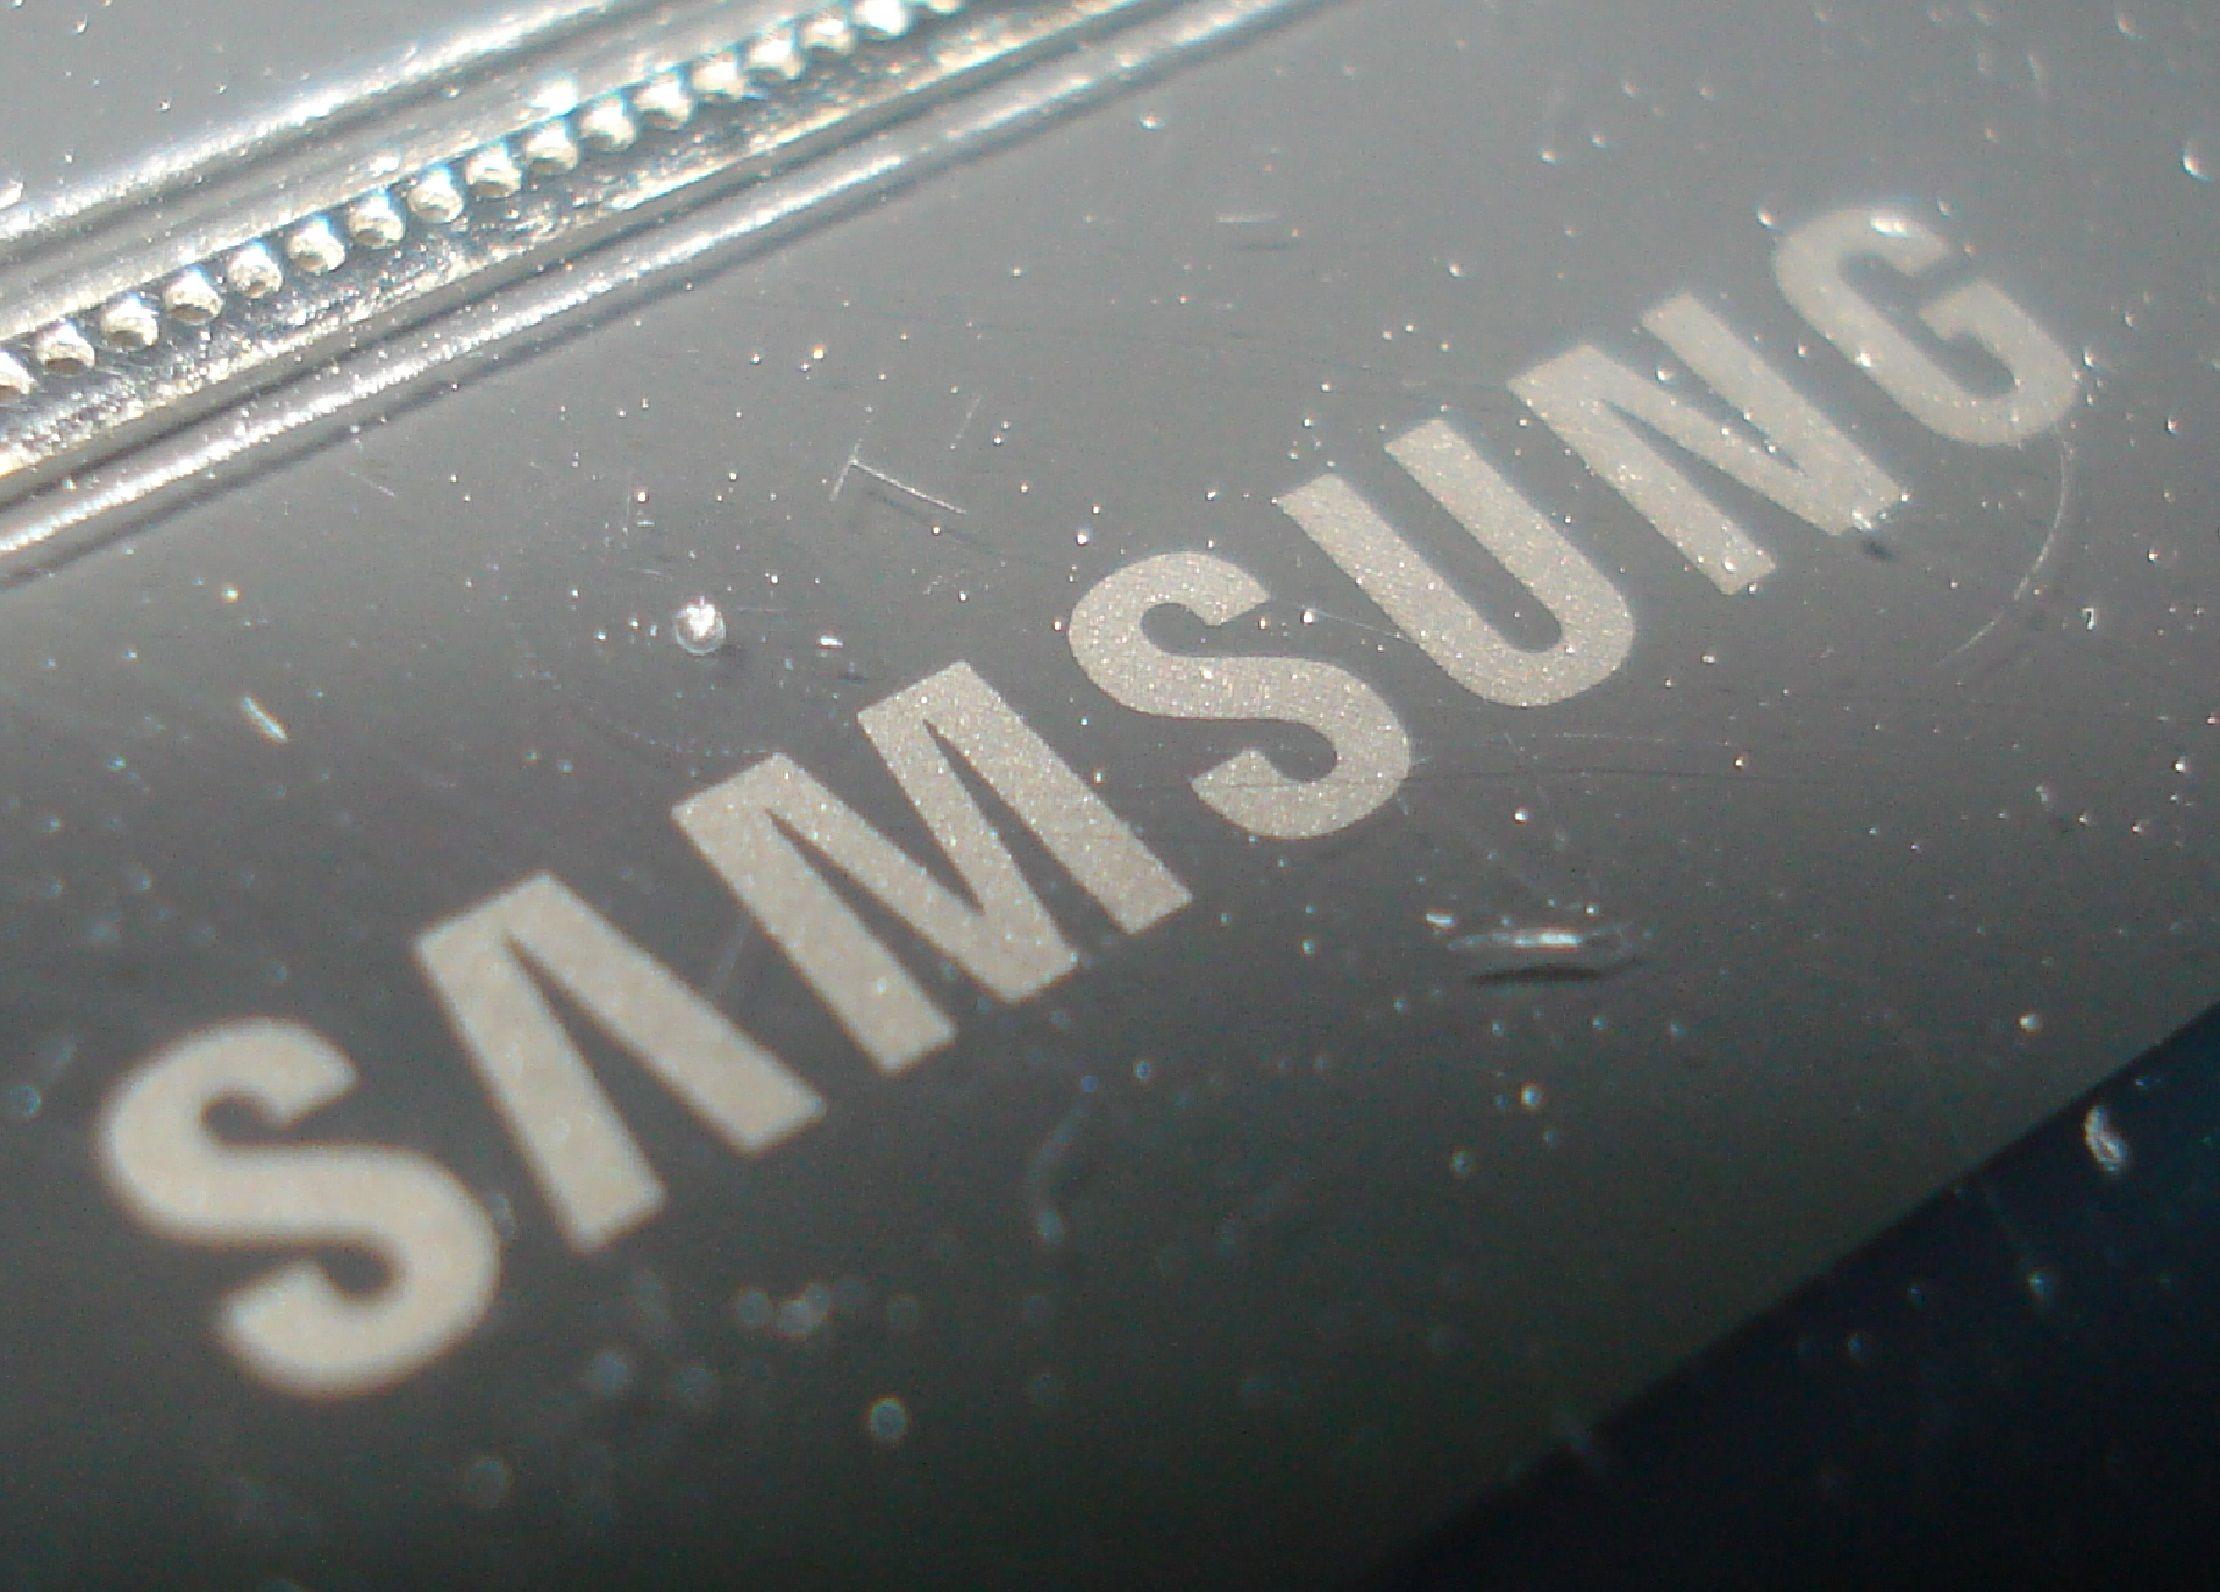 2013 Samsung Logo - Samsung Galaxy S2 Plus Coming In Early 2013? - GoAndroid